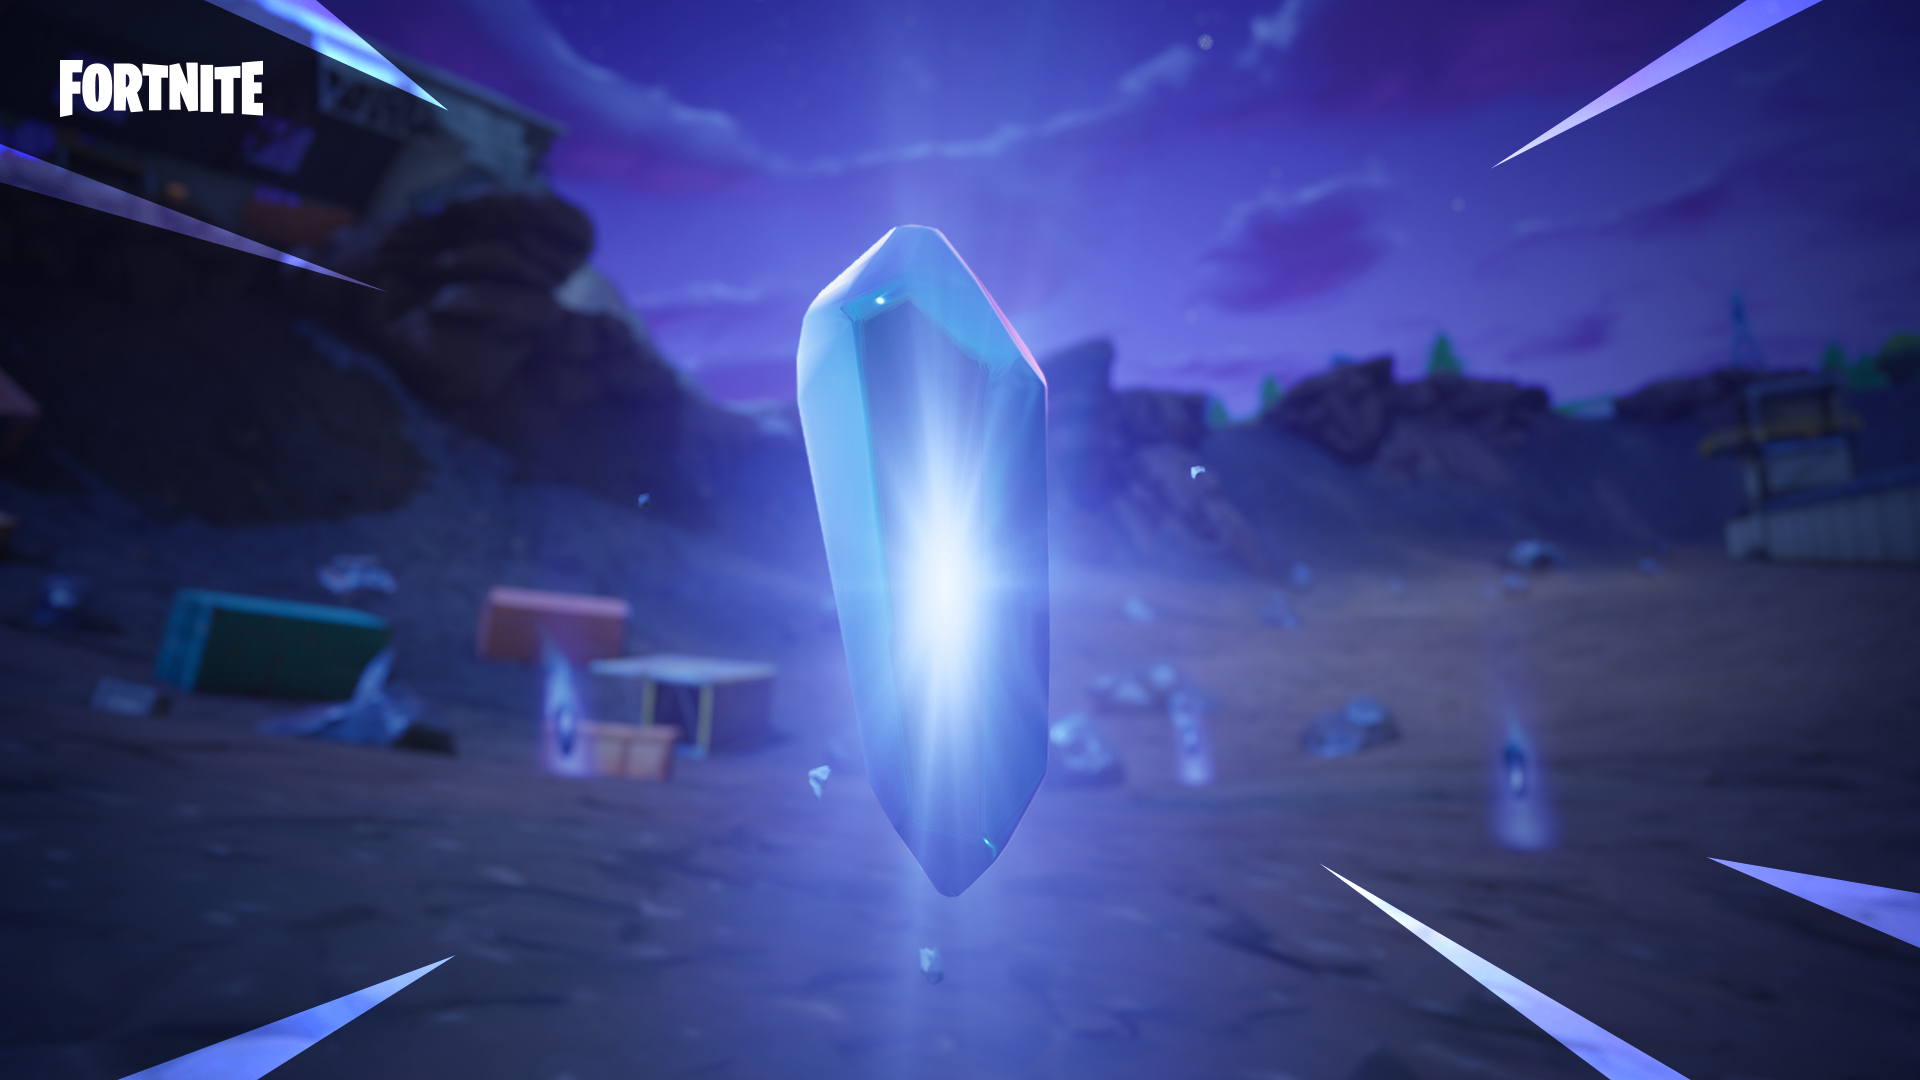 Fortnite What Are Gravity Stones Fortnite Season 4 Starts Now With A Bang On Xbox One Xbox Wire